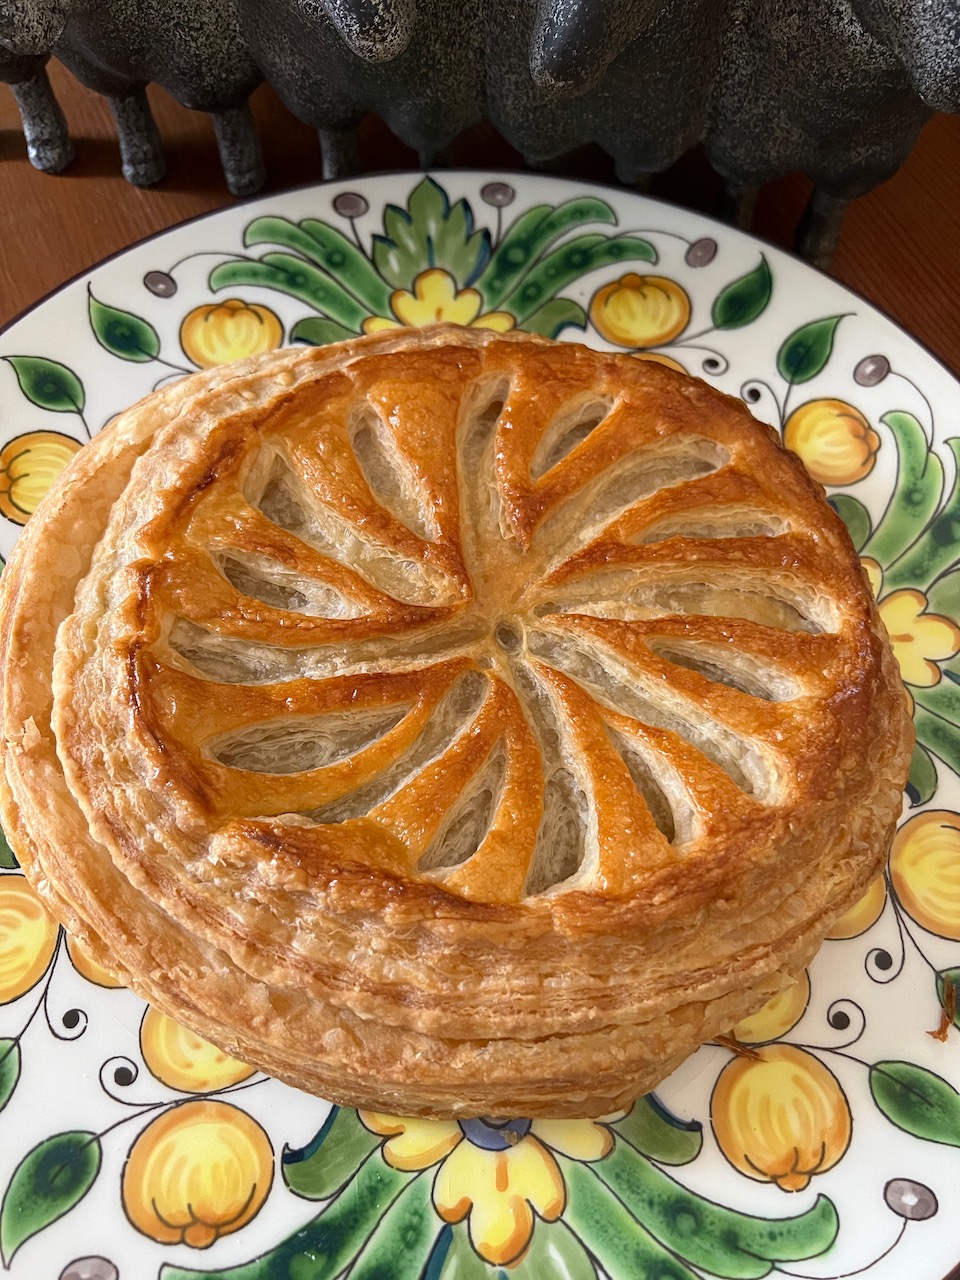 French Galette Filled with Almond Cream - Mandelin